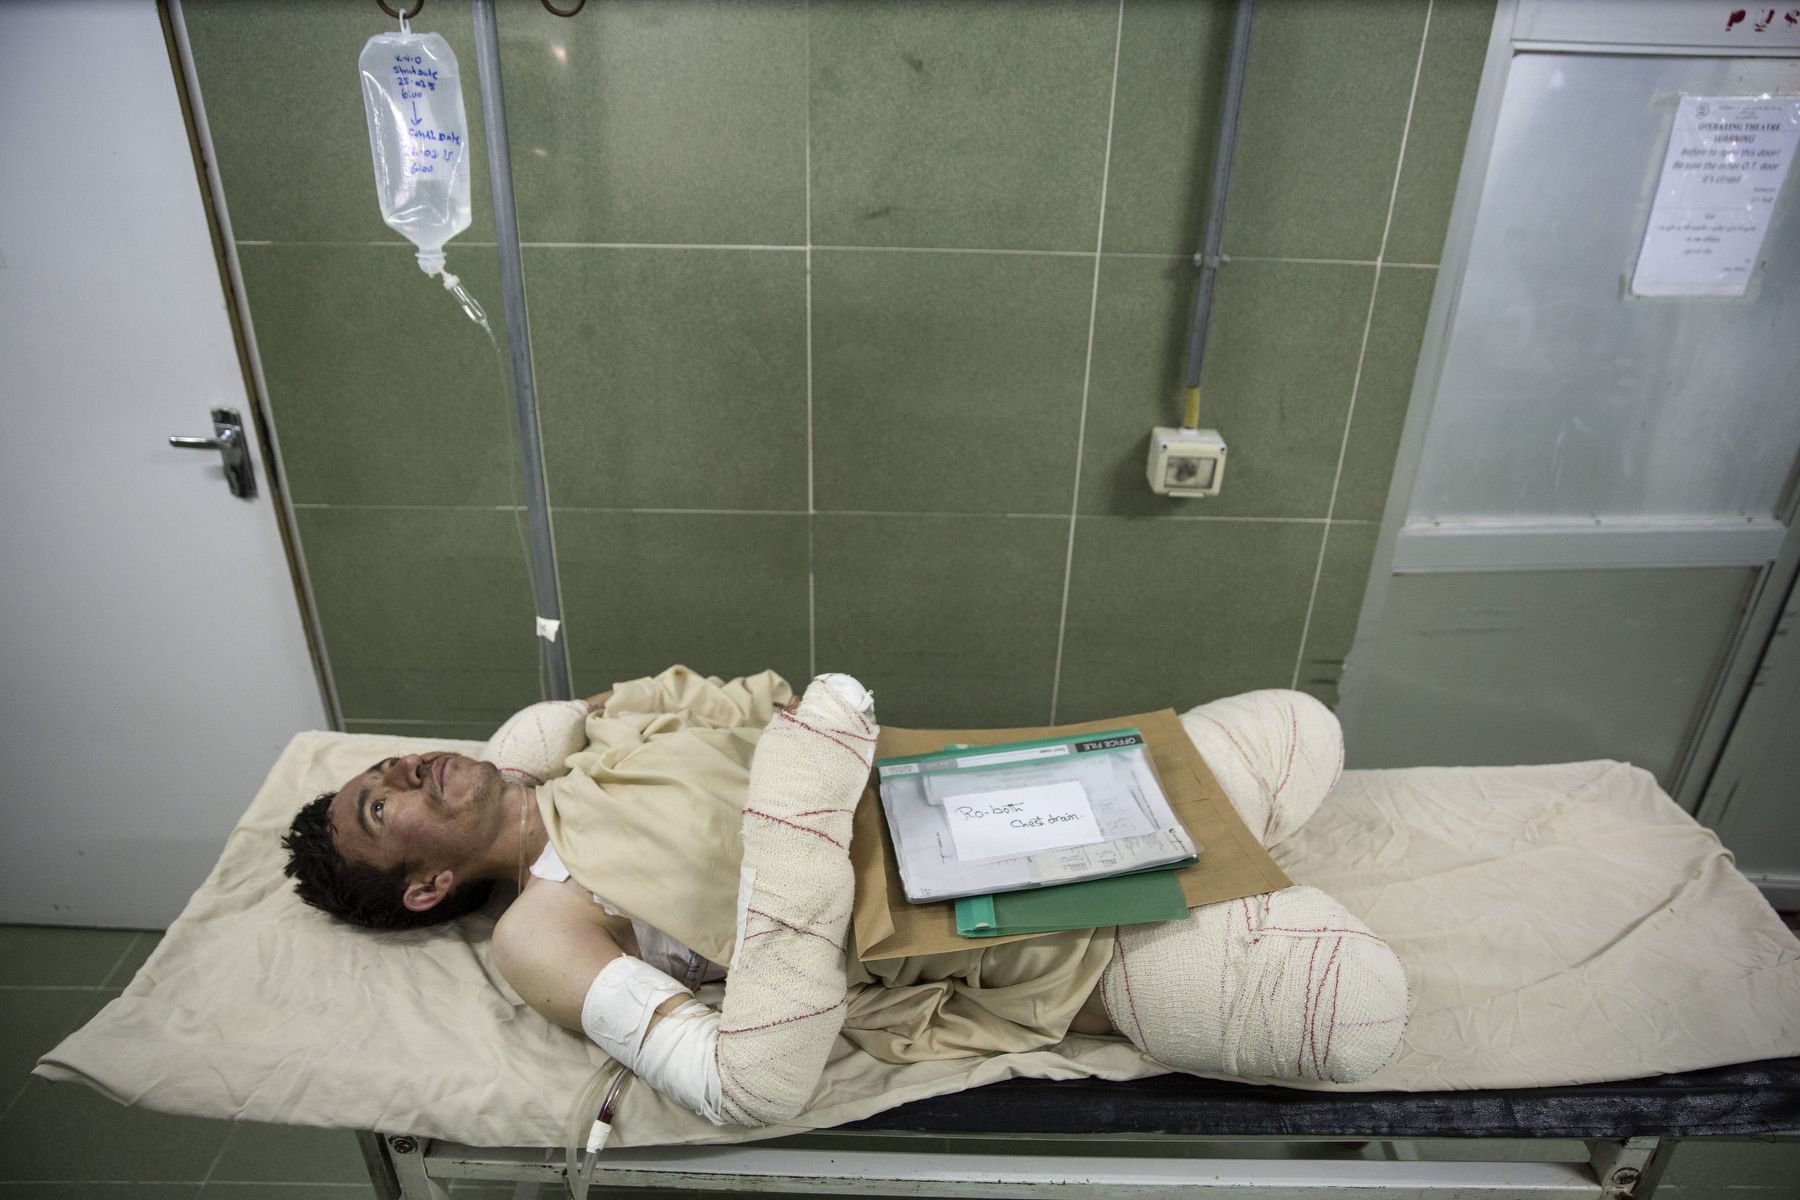 Sayed Malik, 25, waits to go into surgery. He lost his legs while demining, as a ANA soldier in Sangin. Lashkar Gah, Afghanistan. Image by Paula Bronstein. Afghanistan, 2015.